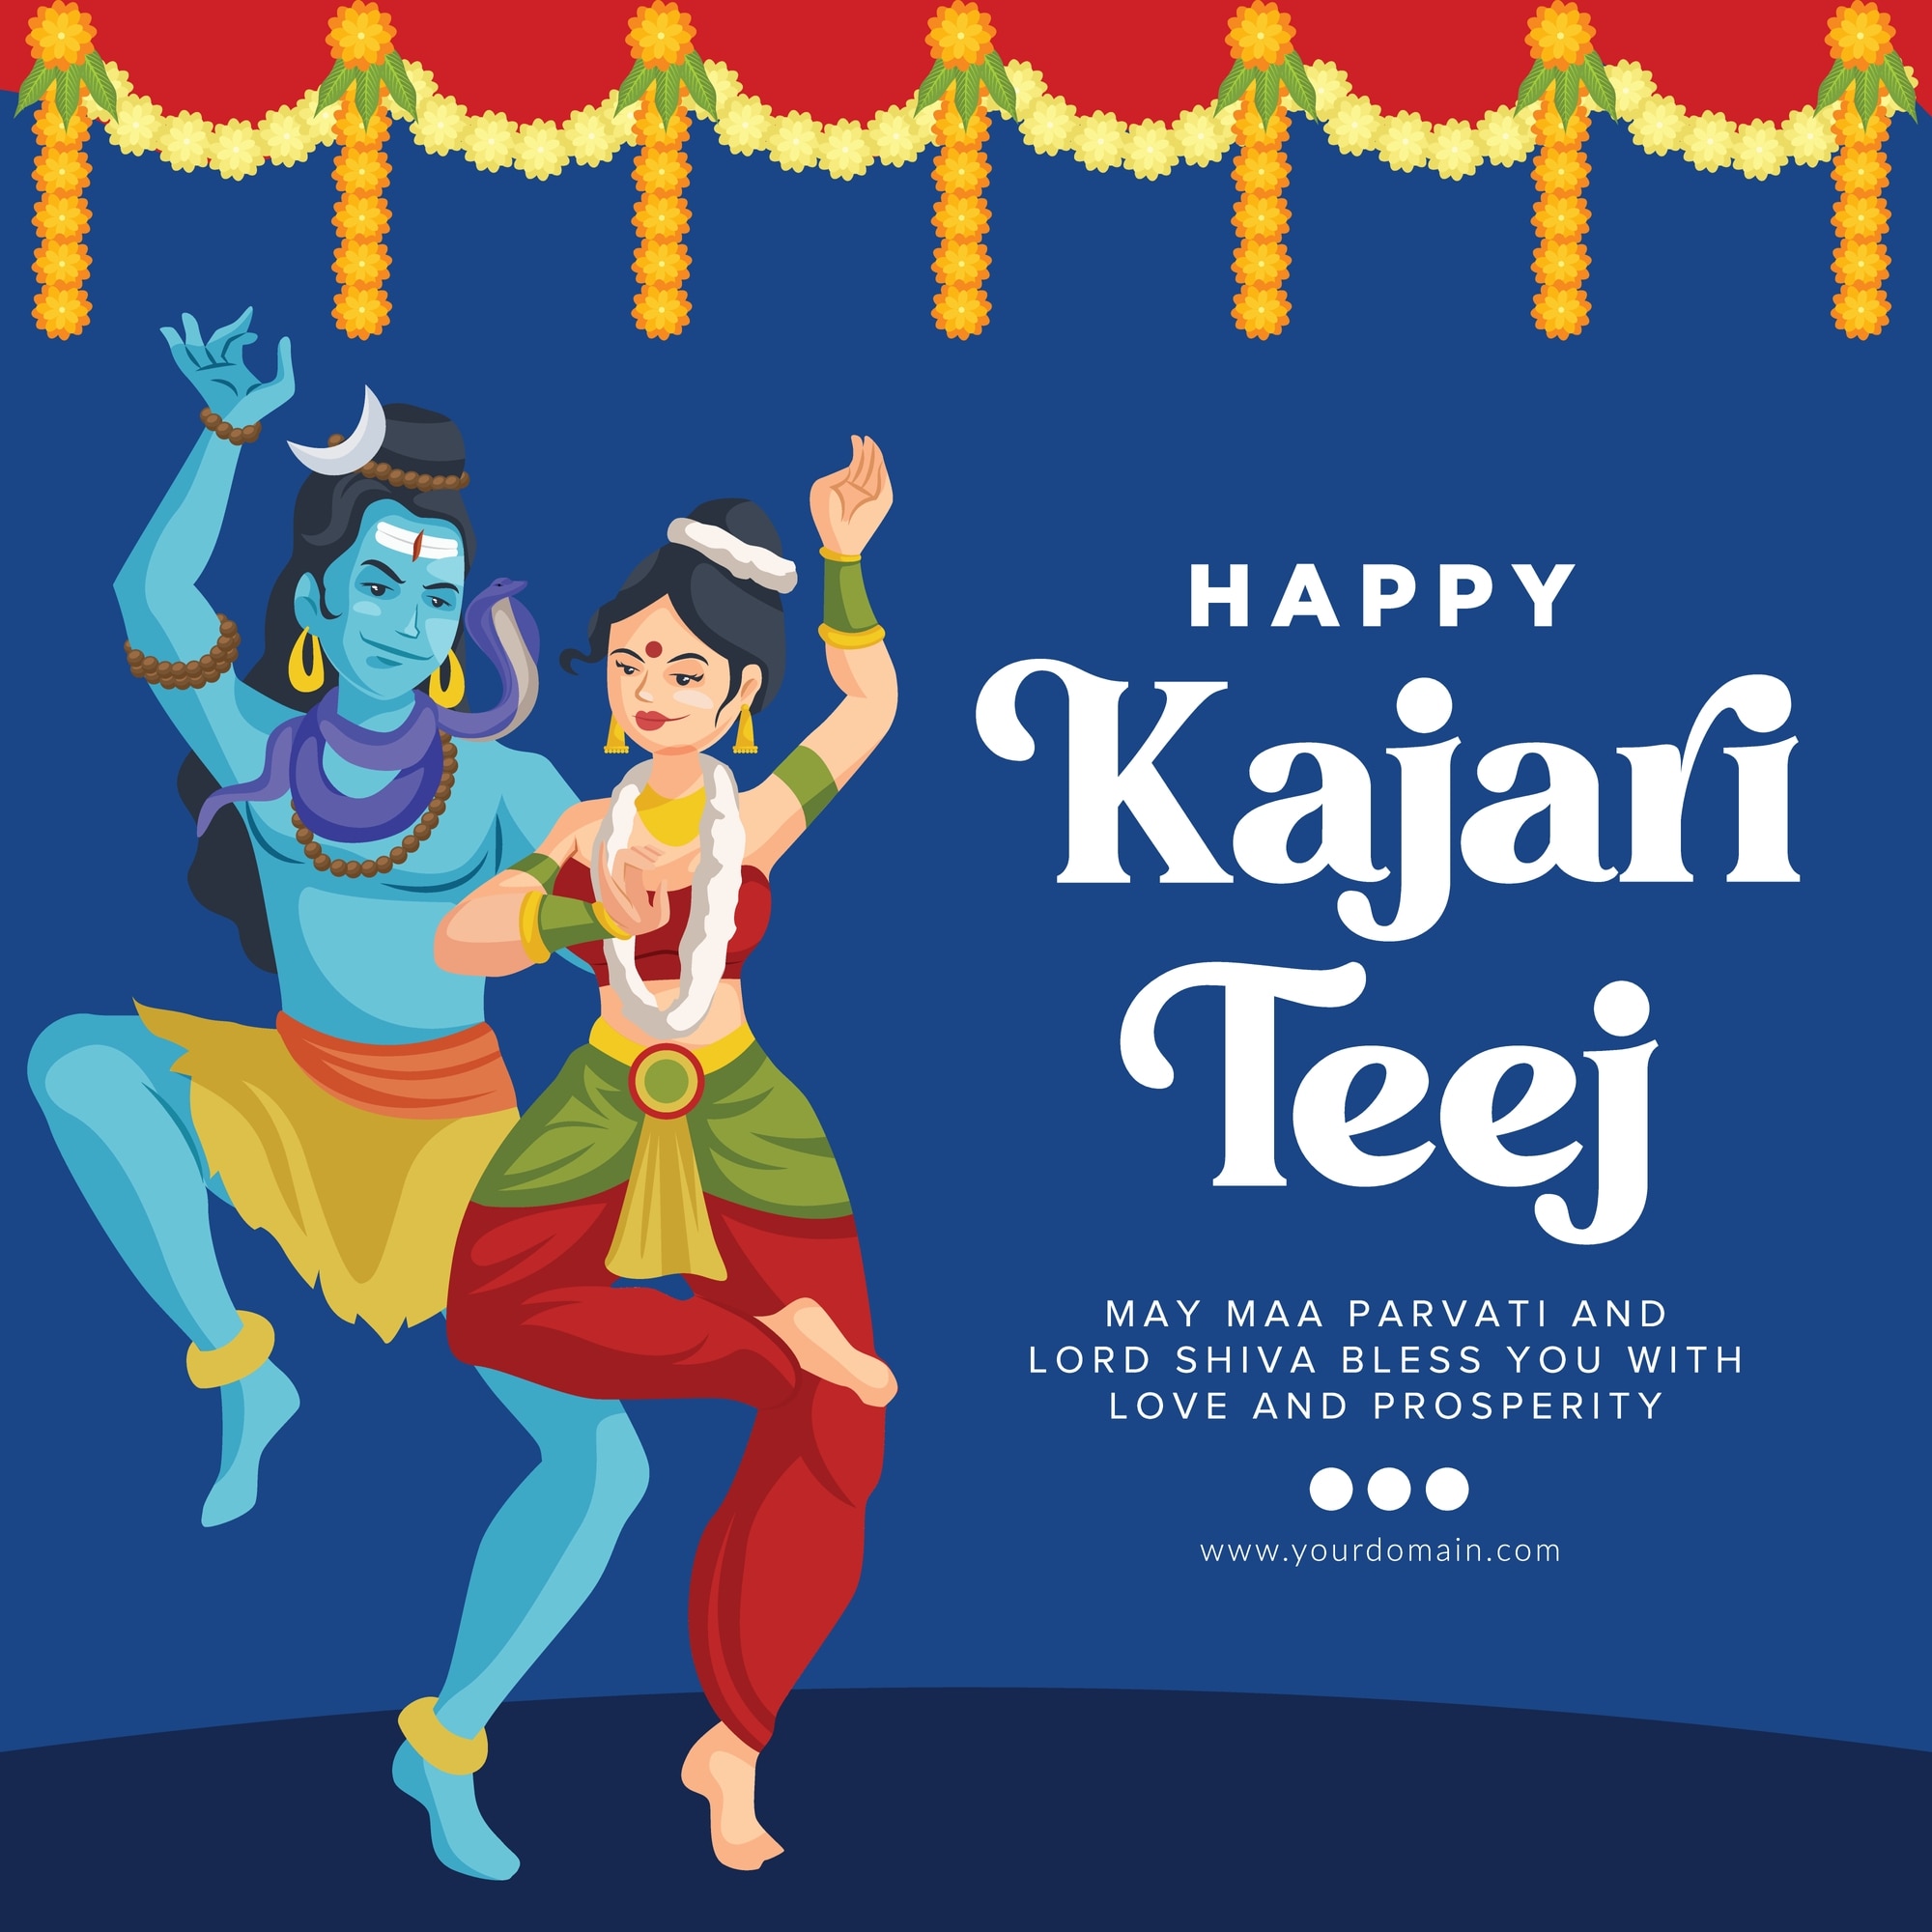 Happy Kajari Teej 2022: Quotes, Wishes, Messages and WhatsApp Greetings to Share. (Image: Shutterstock)